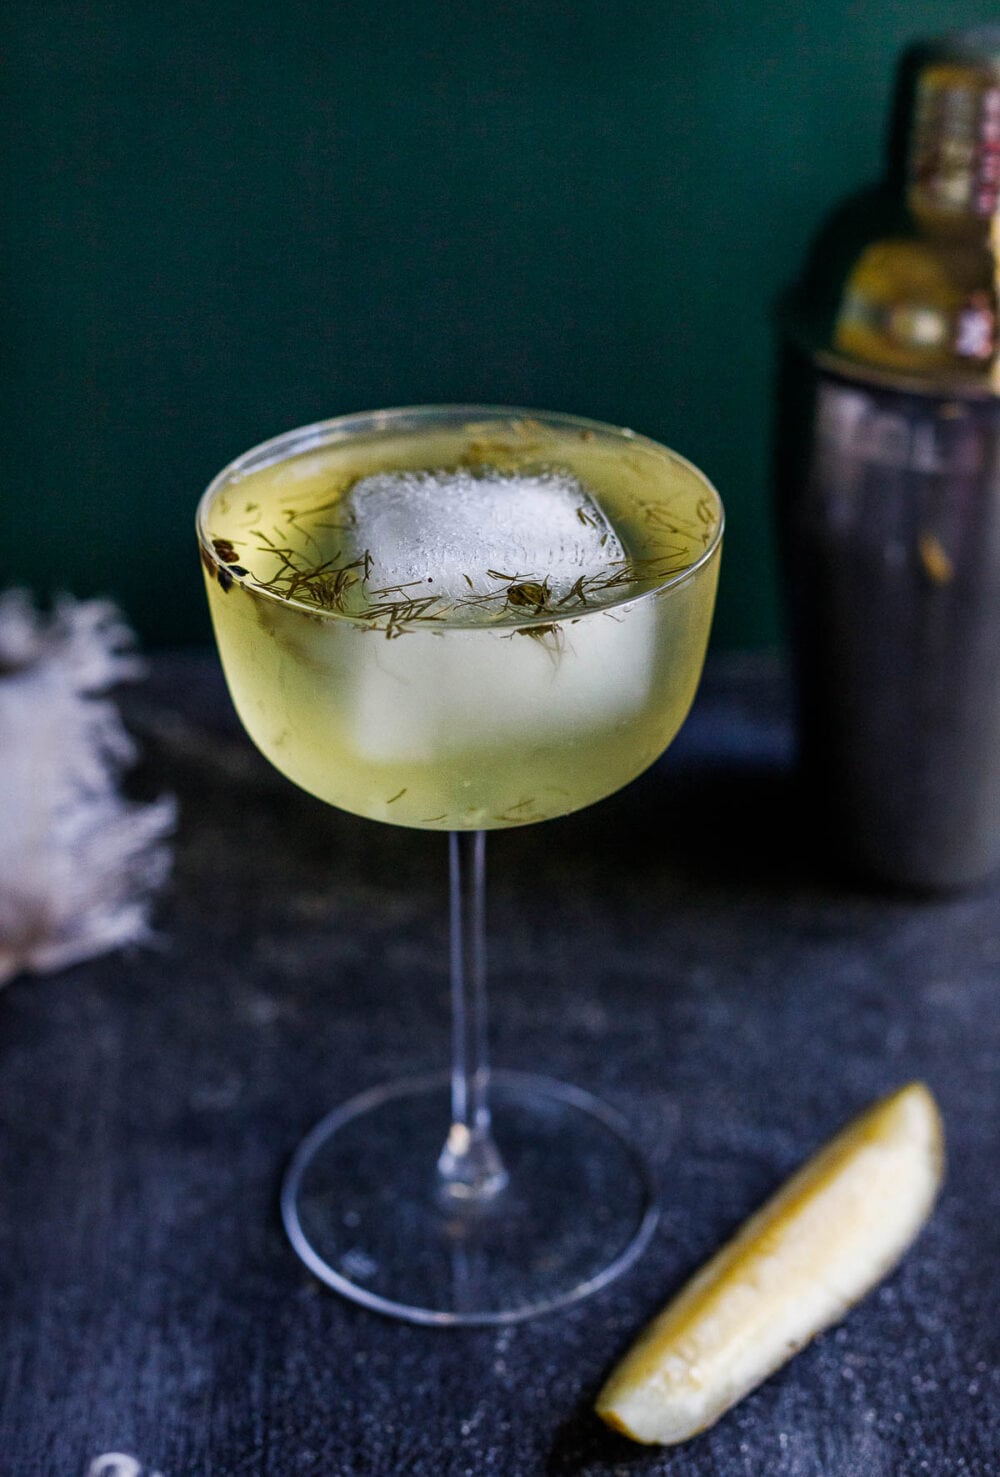 Gin and Brine is a cool summer cocktail made with probiotic, dilly pickle brine, celery bitters and your choice of gin.  A fun twist on a dirty martini.